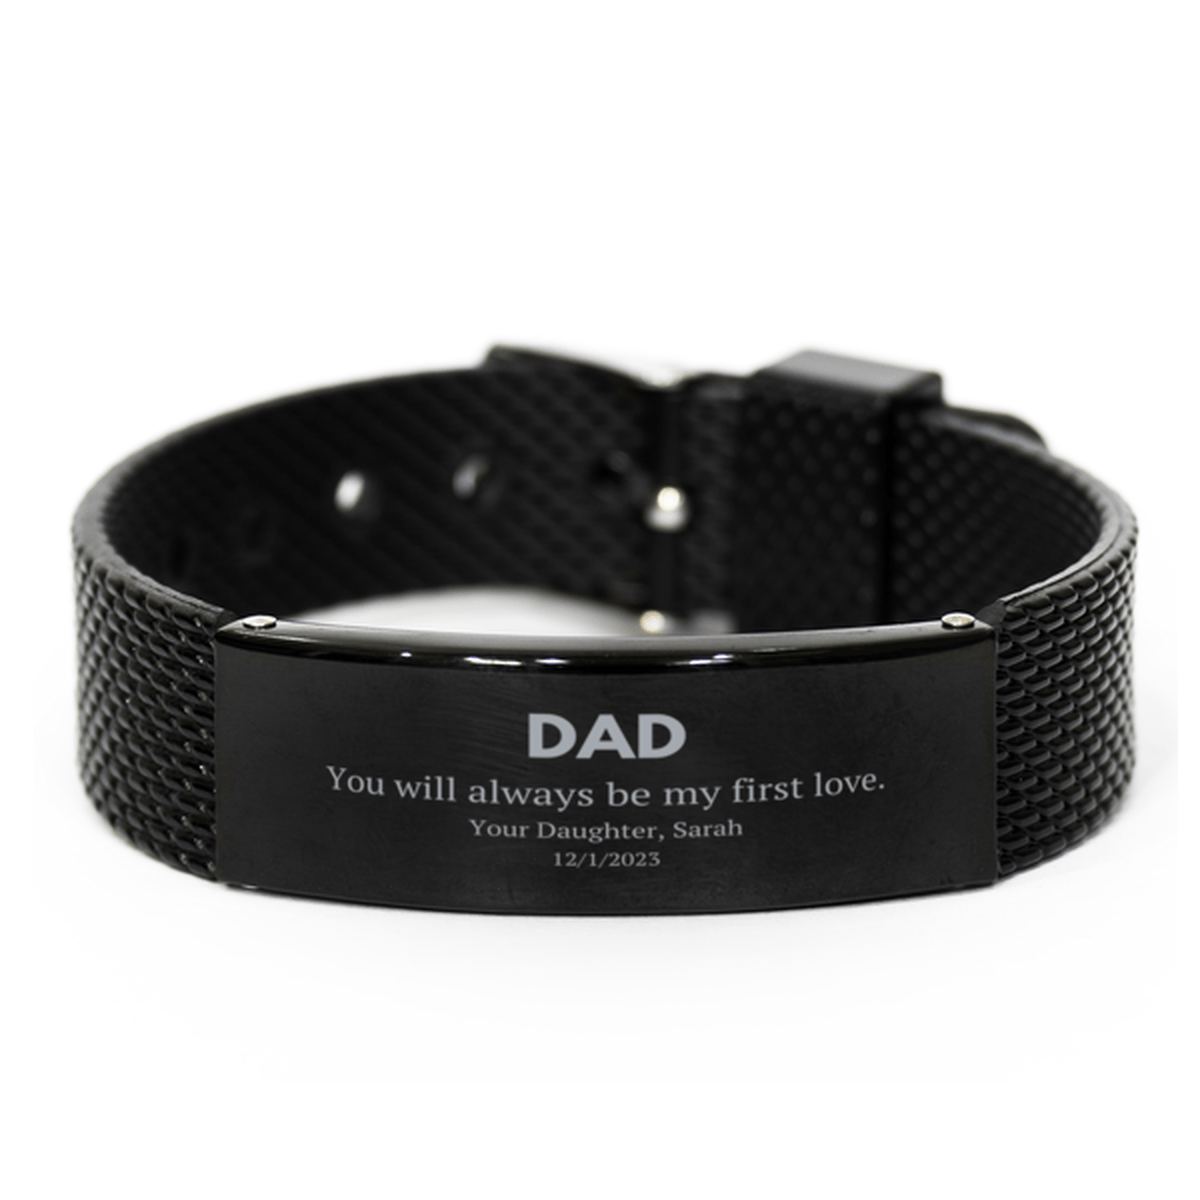 Father Of The Bride Black Bracelet, Wedding Gift Keepsake For Dad of the Bride, Personalized Gift for Dad On My Wedding Day, Bracelet for Dad